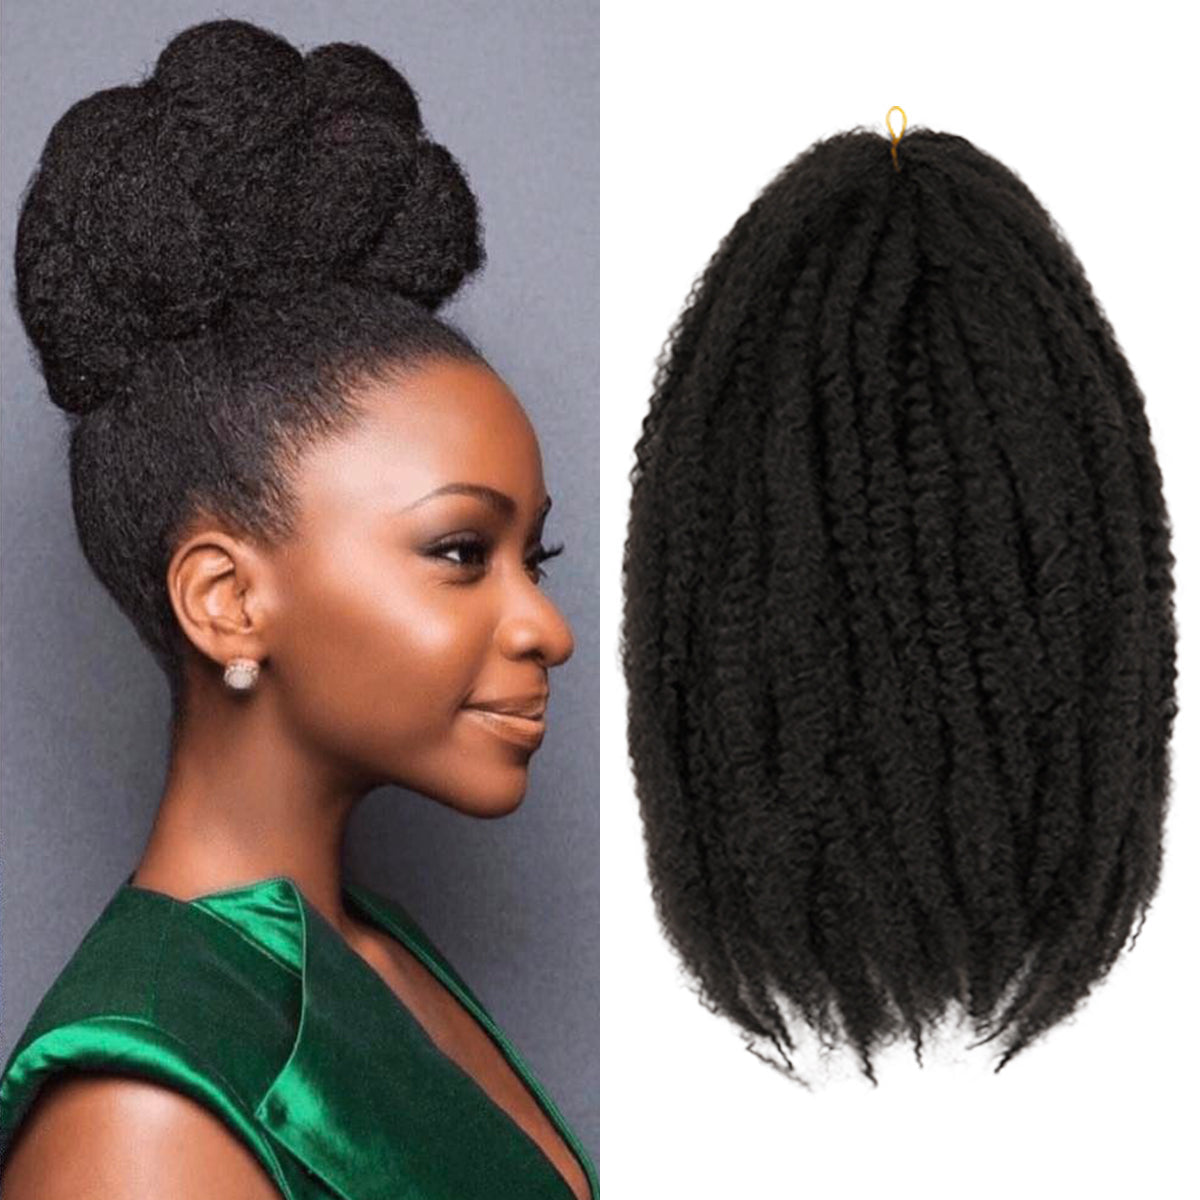 Authentic Synthetic Hair Crochet Braids Afro Twist 18" (Marley Style)